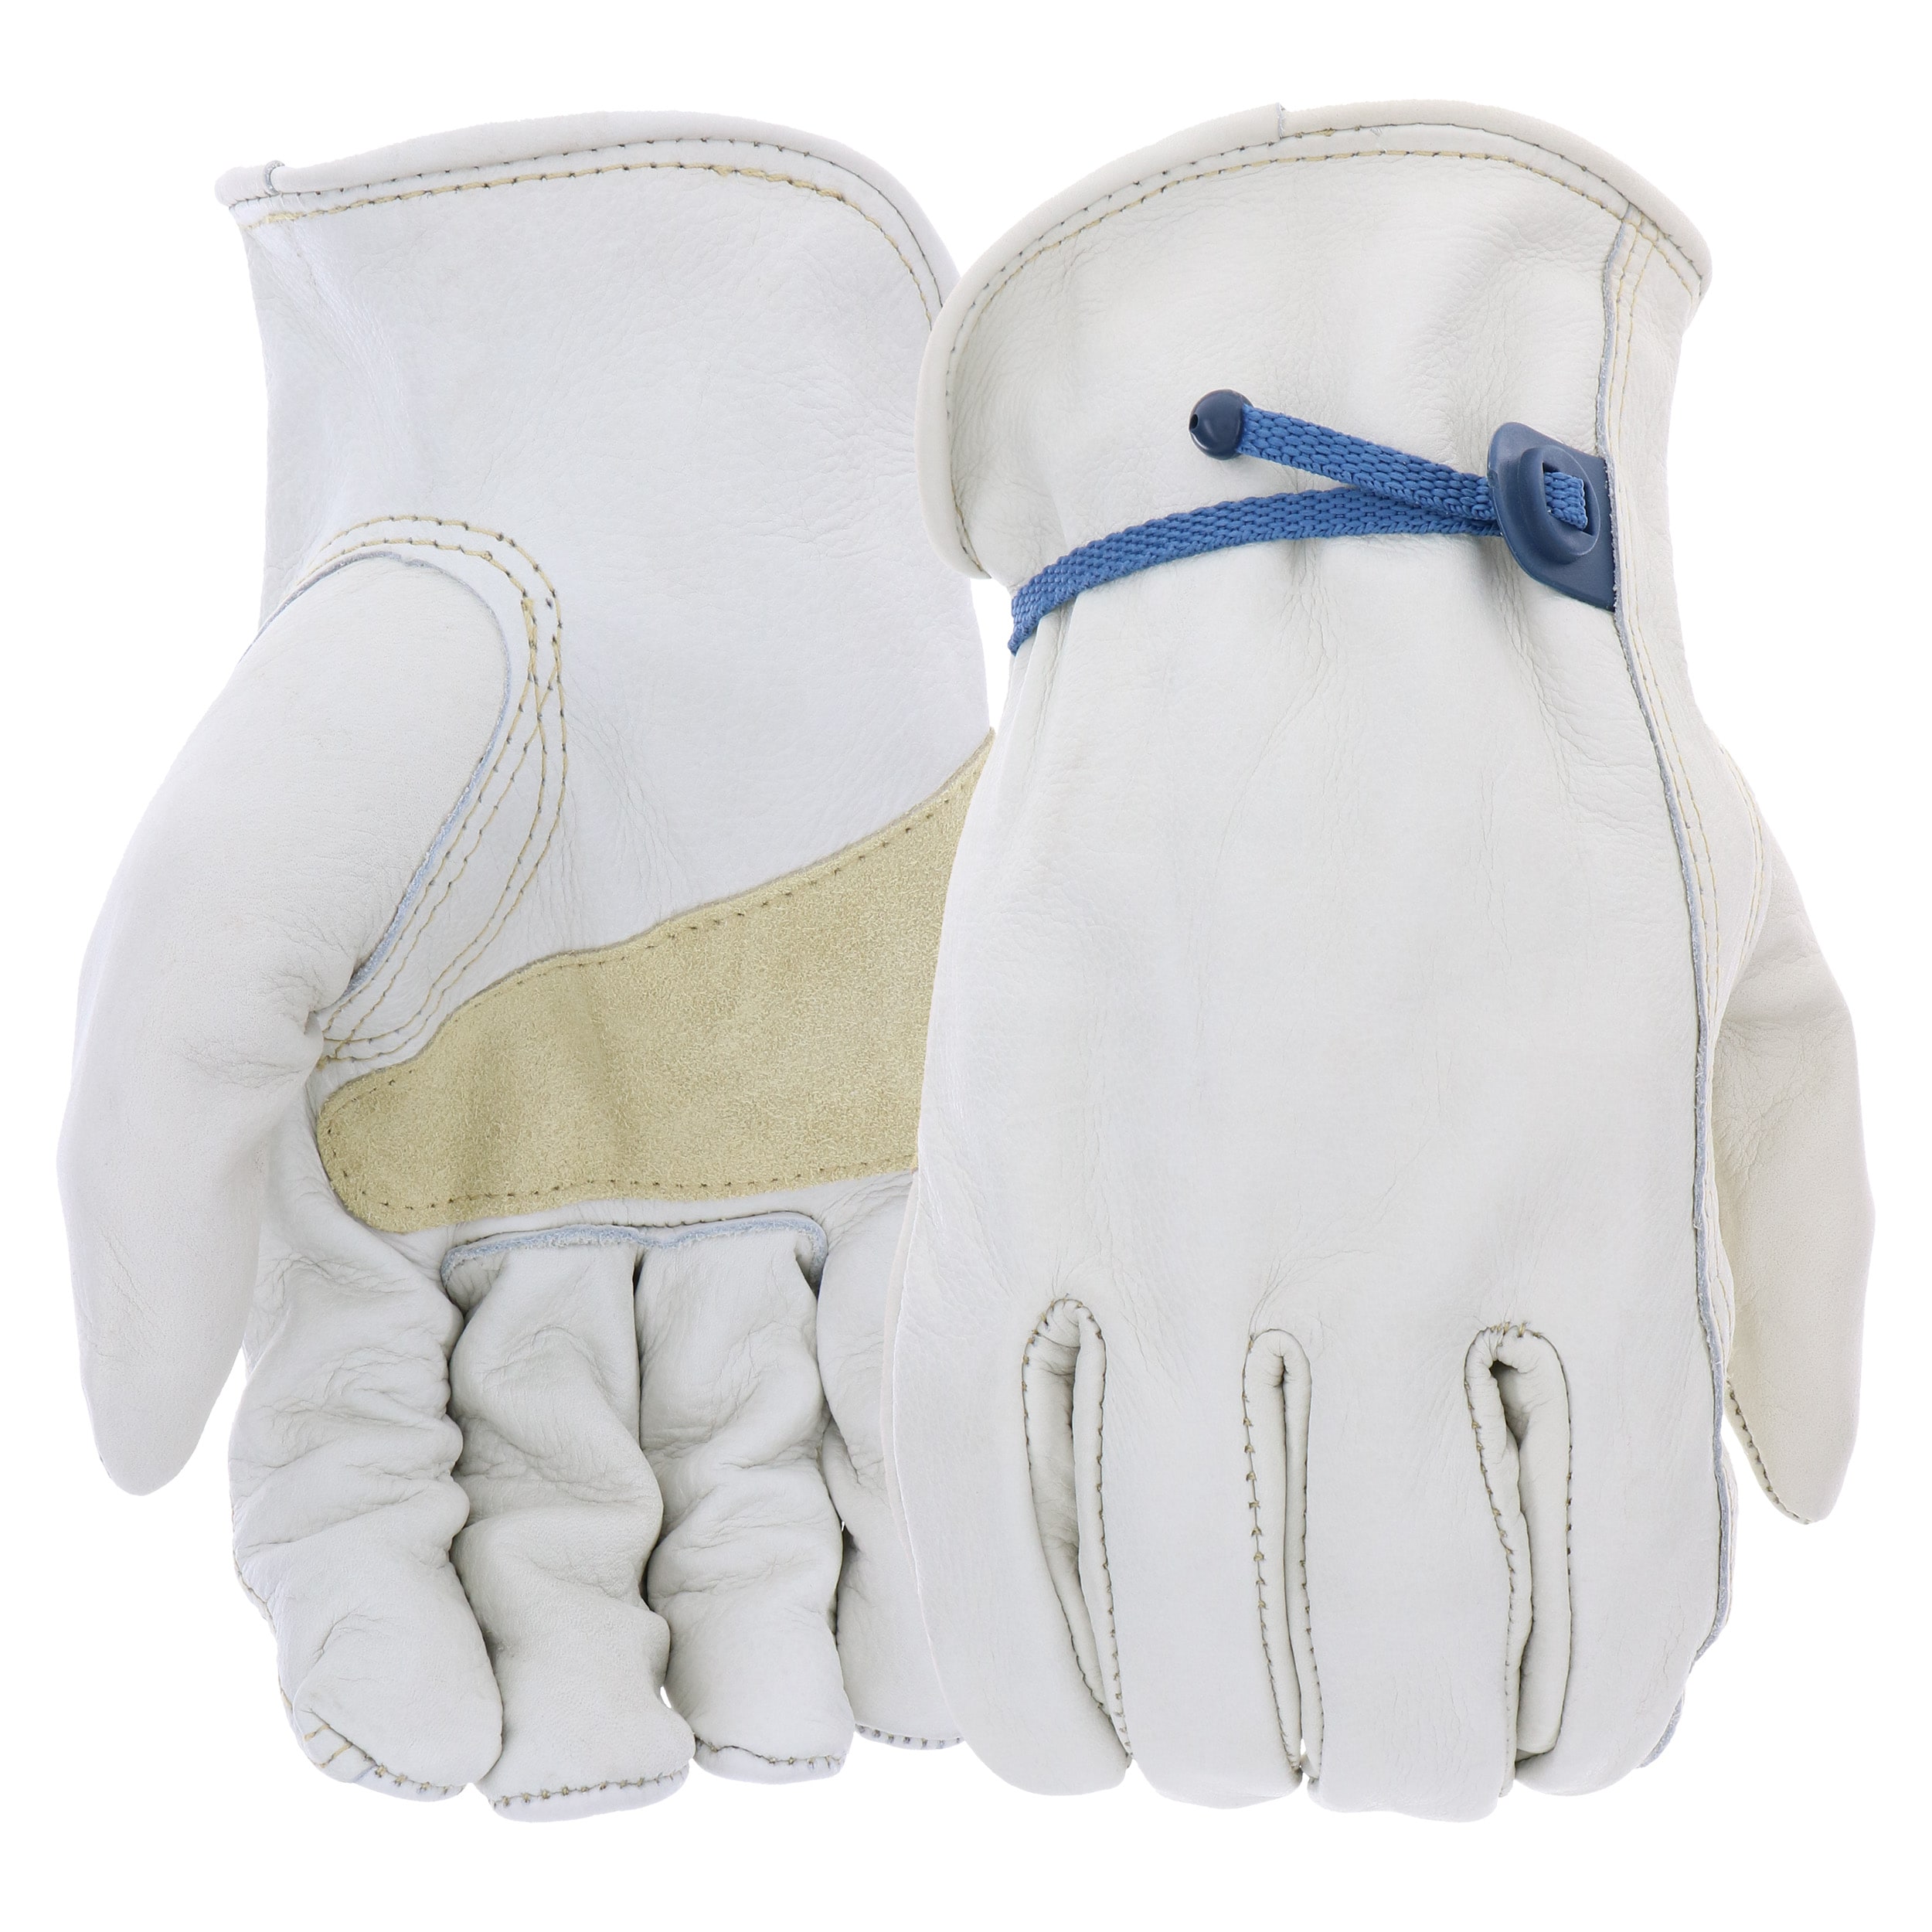 Project Source Large Leather Construction Gloves, (1-Pair) in the